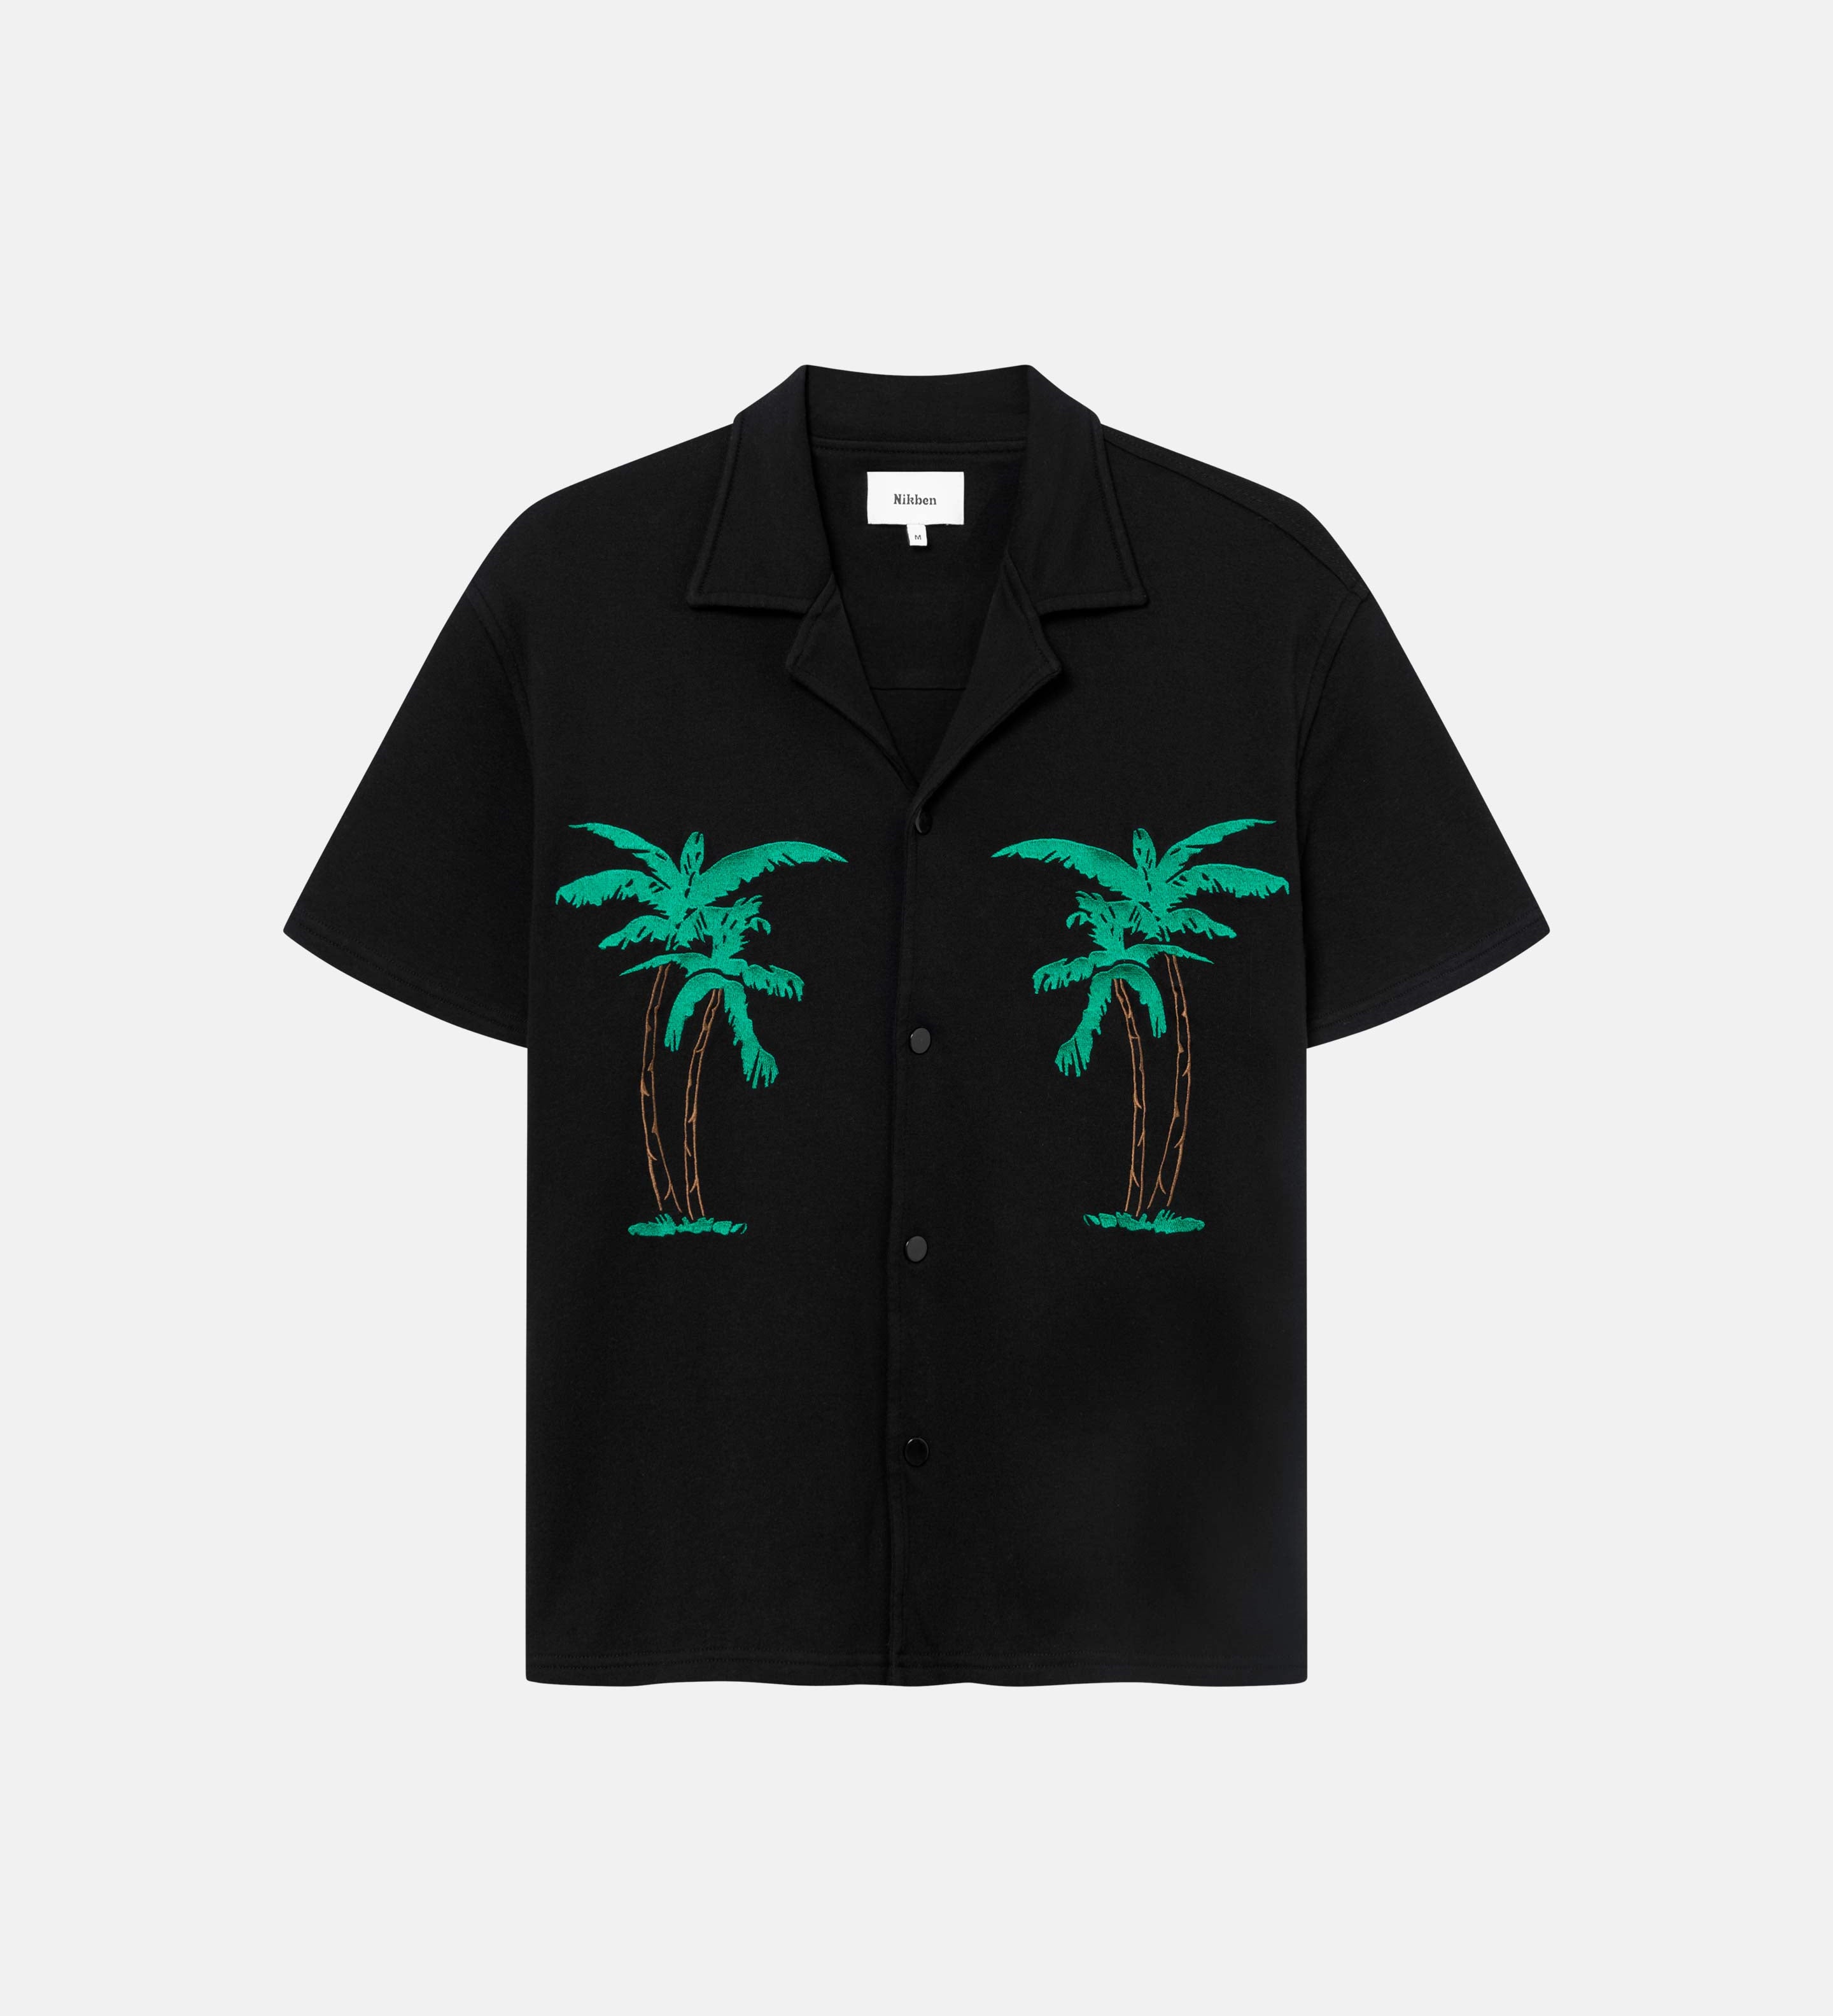 Black short-sleeved shirt with palm tree embroidery